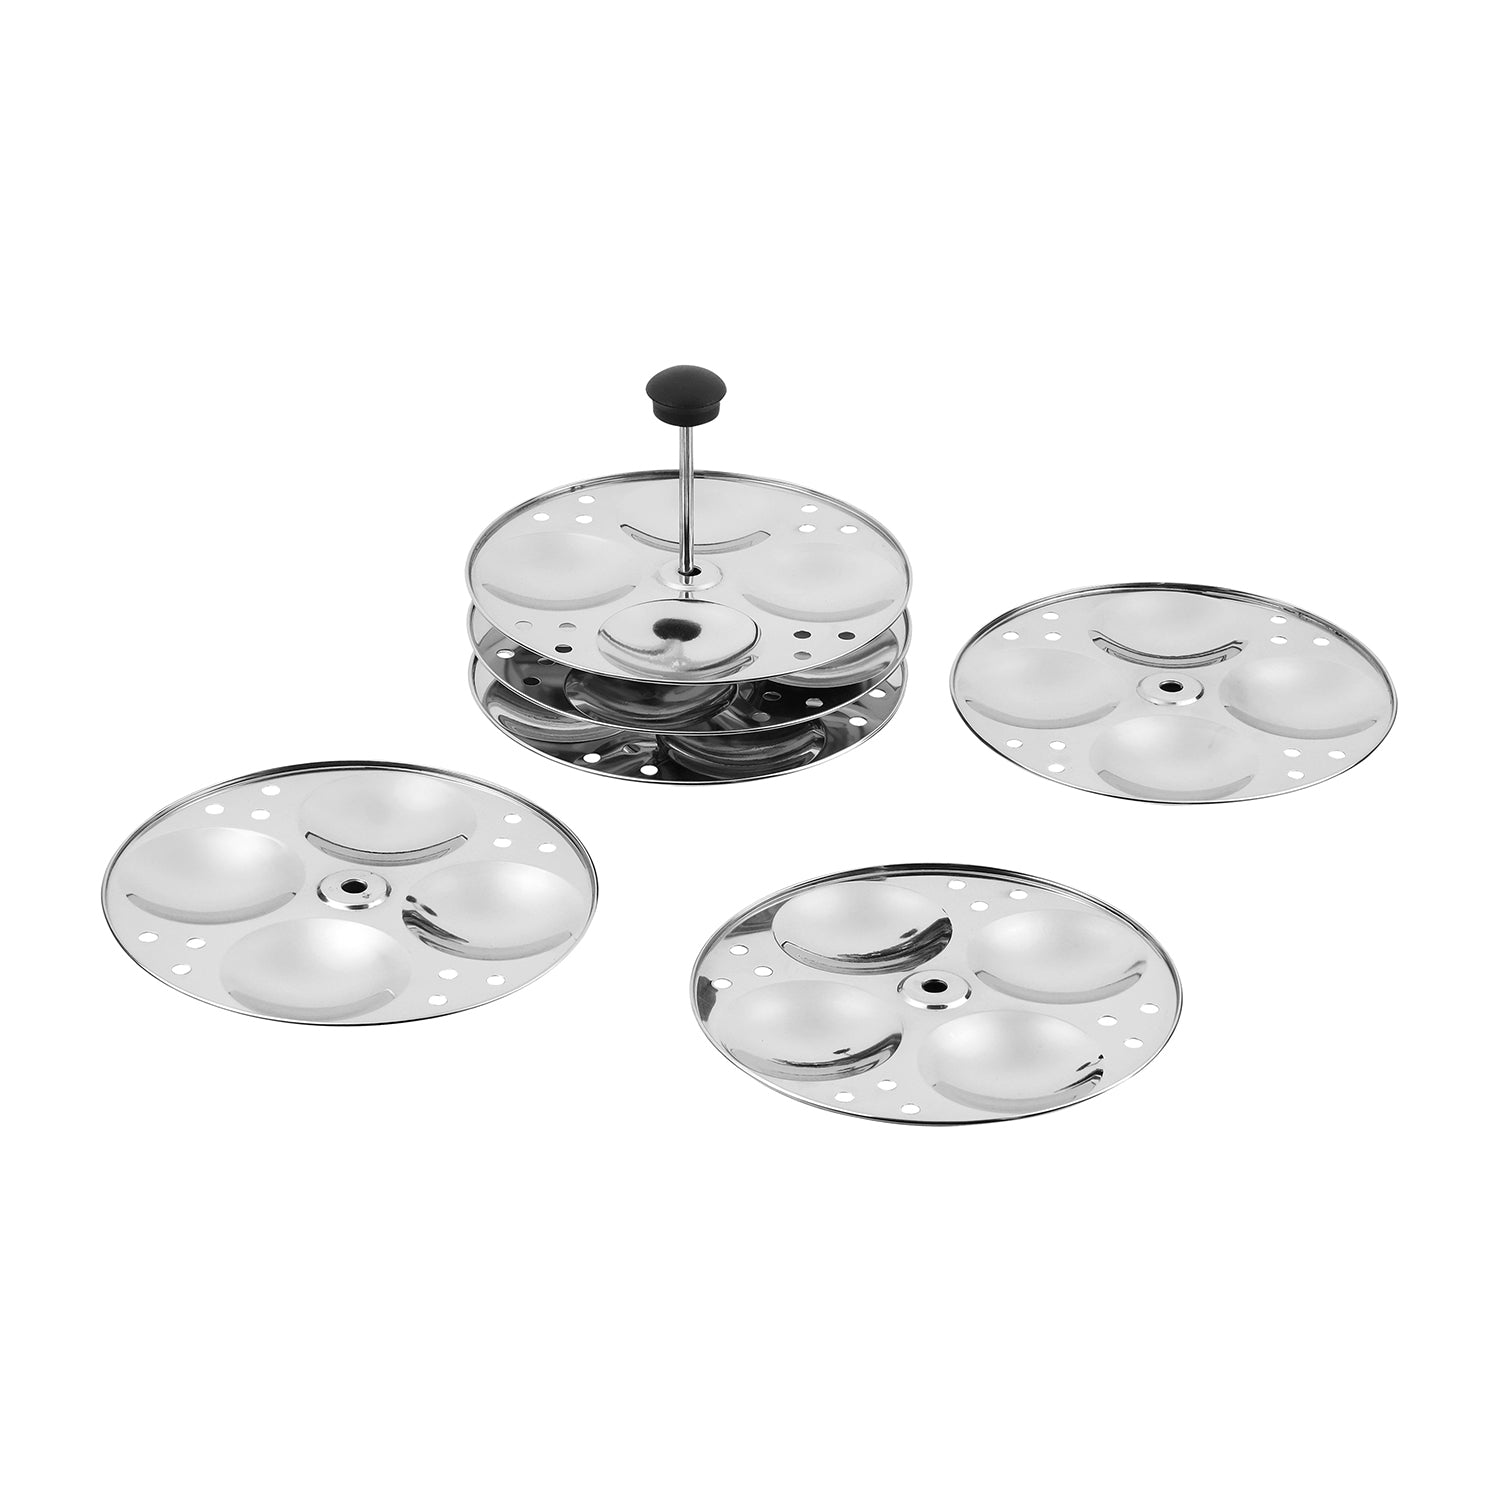 Stainless Steel Idli Plates with Stand